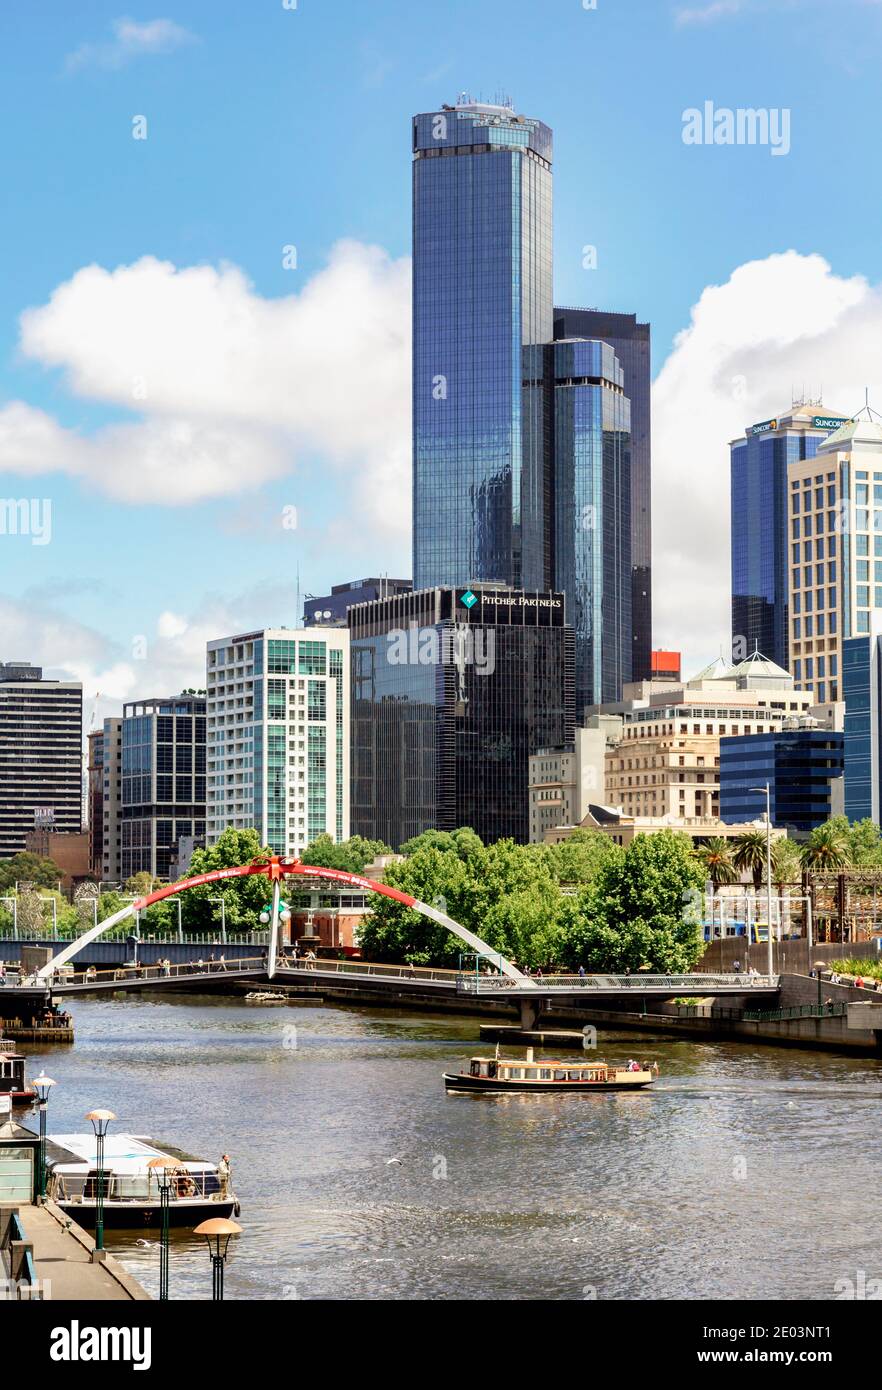 Modern buildings on the banks of the Yarra River, Melbourne, Victoria, Australia. Stock Photo